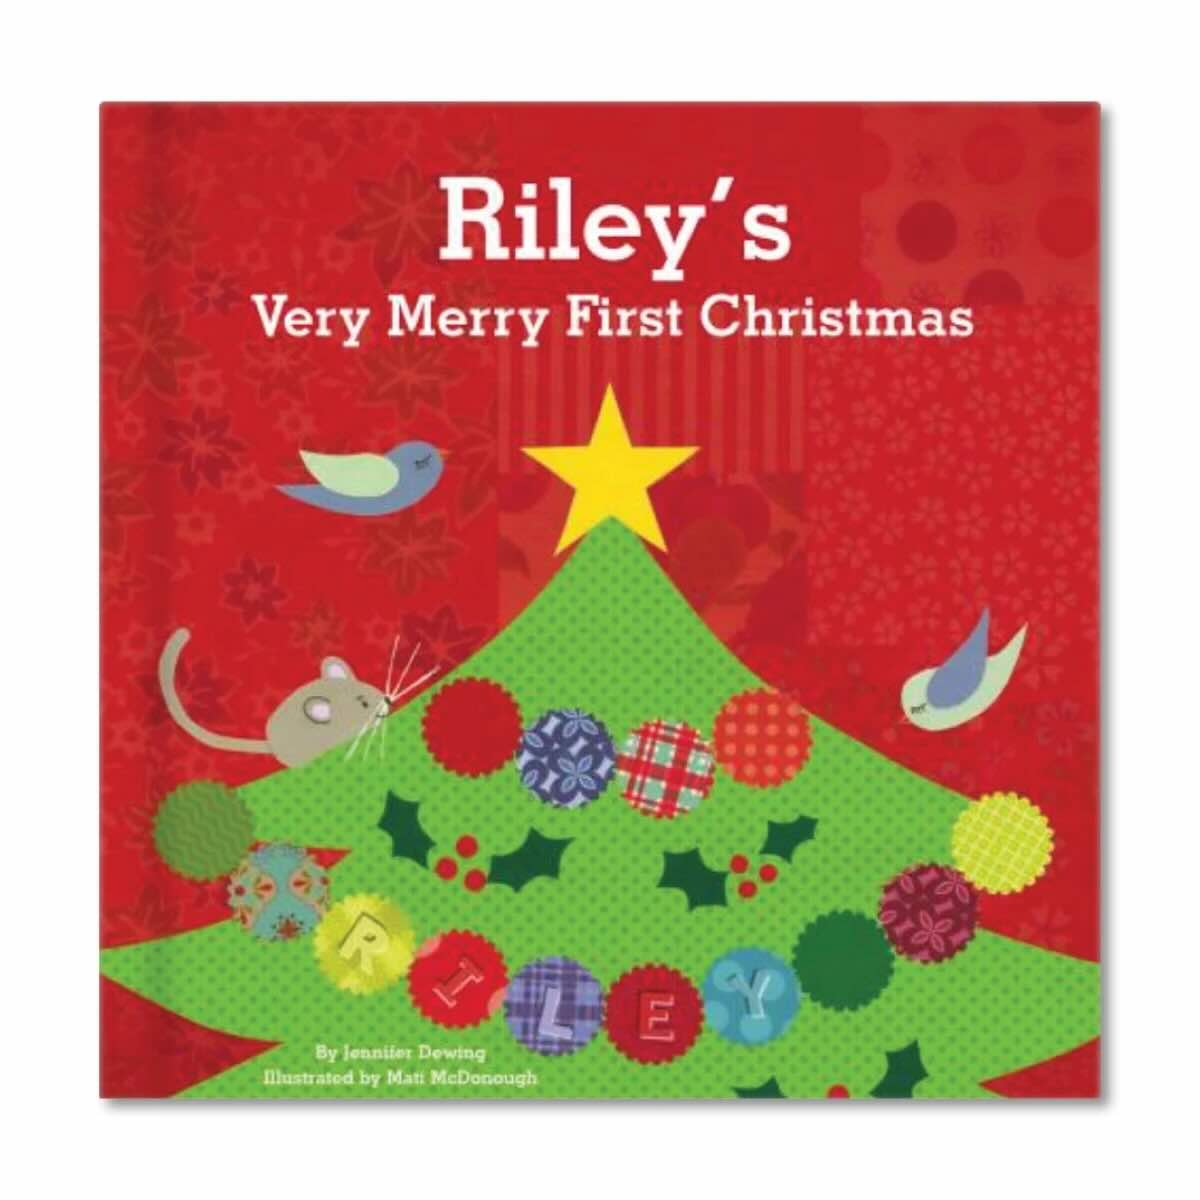 IseeMe Book Christmas Tree Personalized Book For Kids shows a red personalized book with a whimsical christmas tree covering the page and personalized with the name of the baby to say "Riley's Very Merry First Christmas"